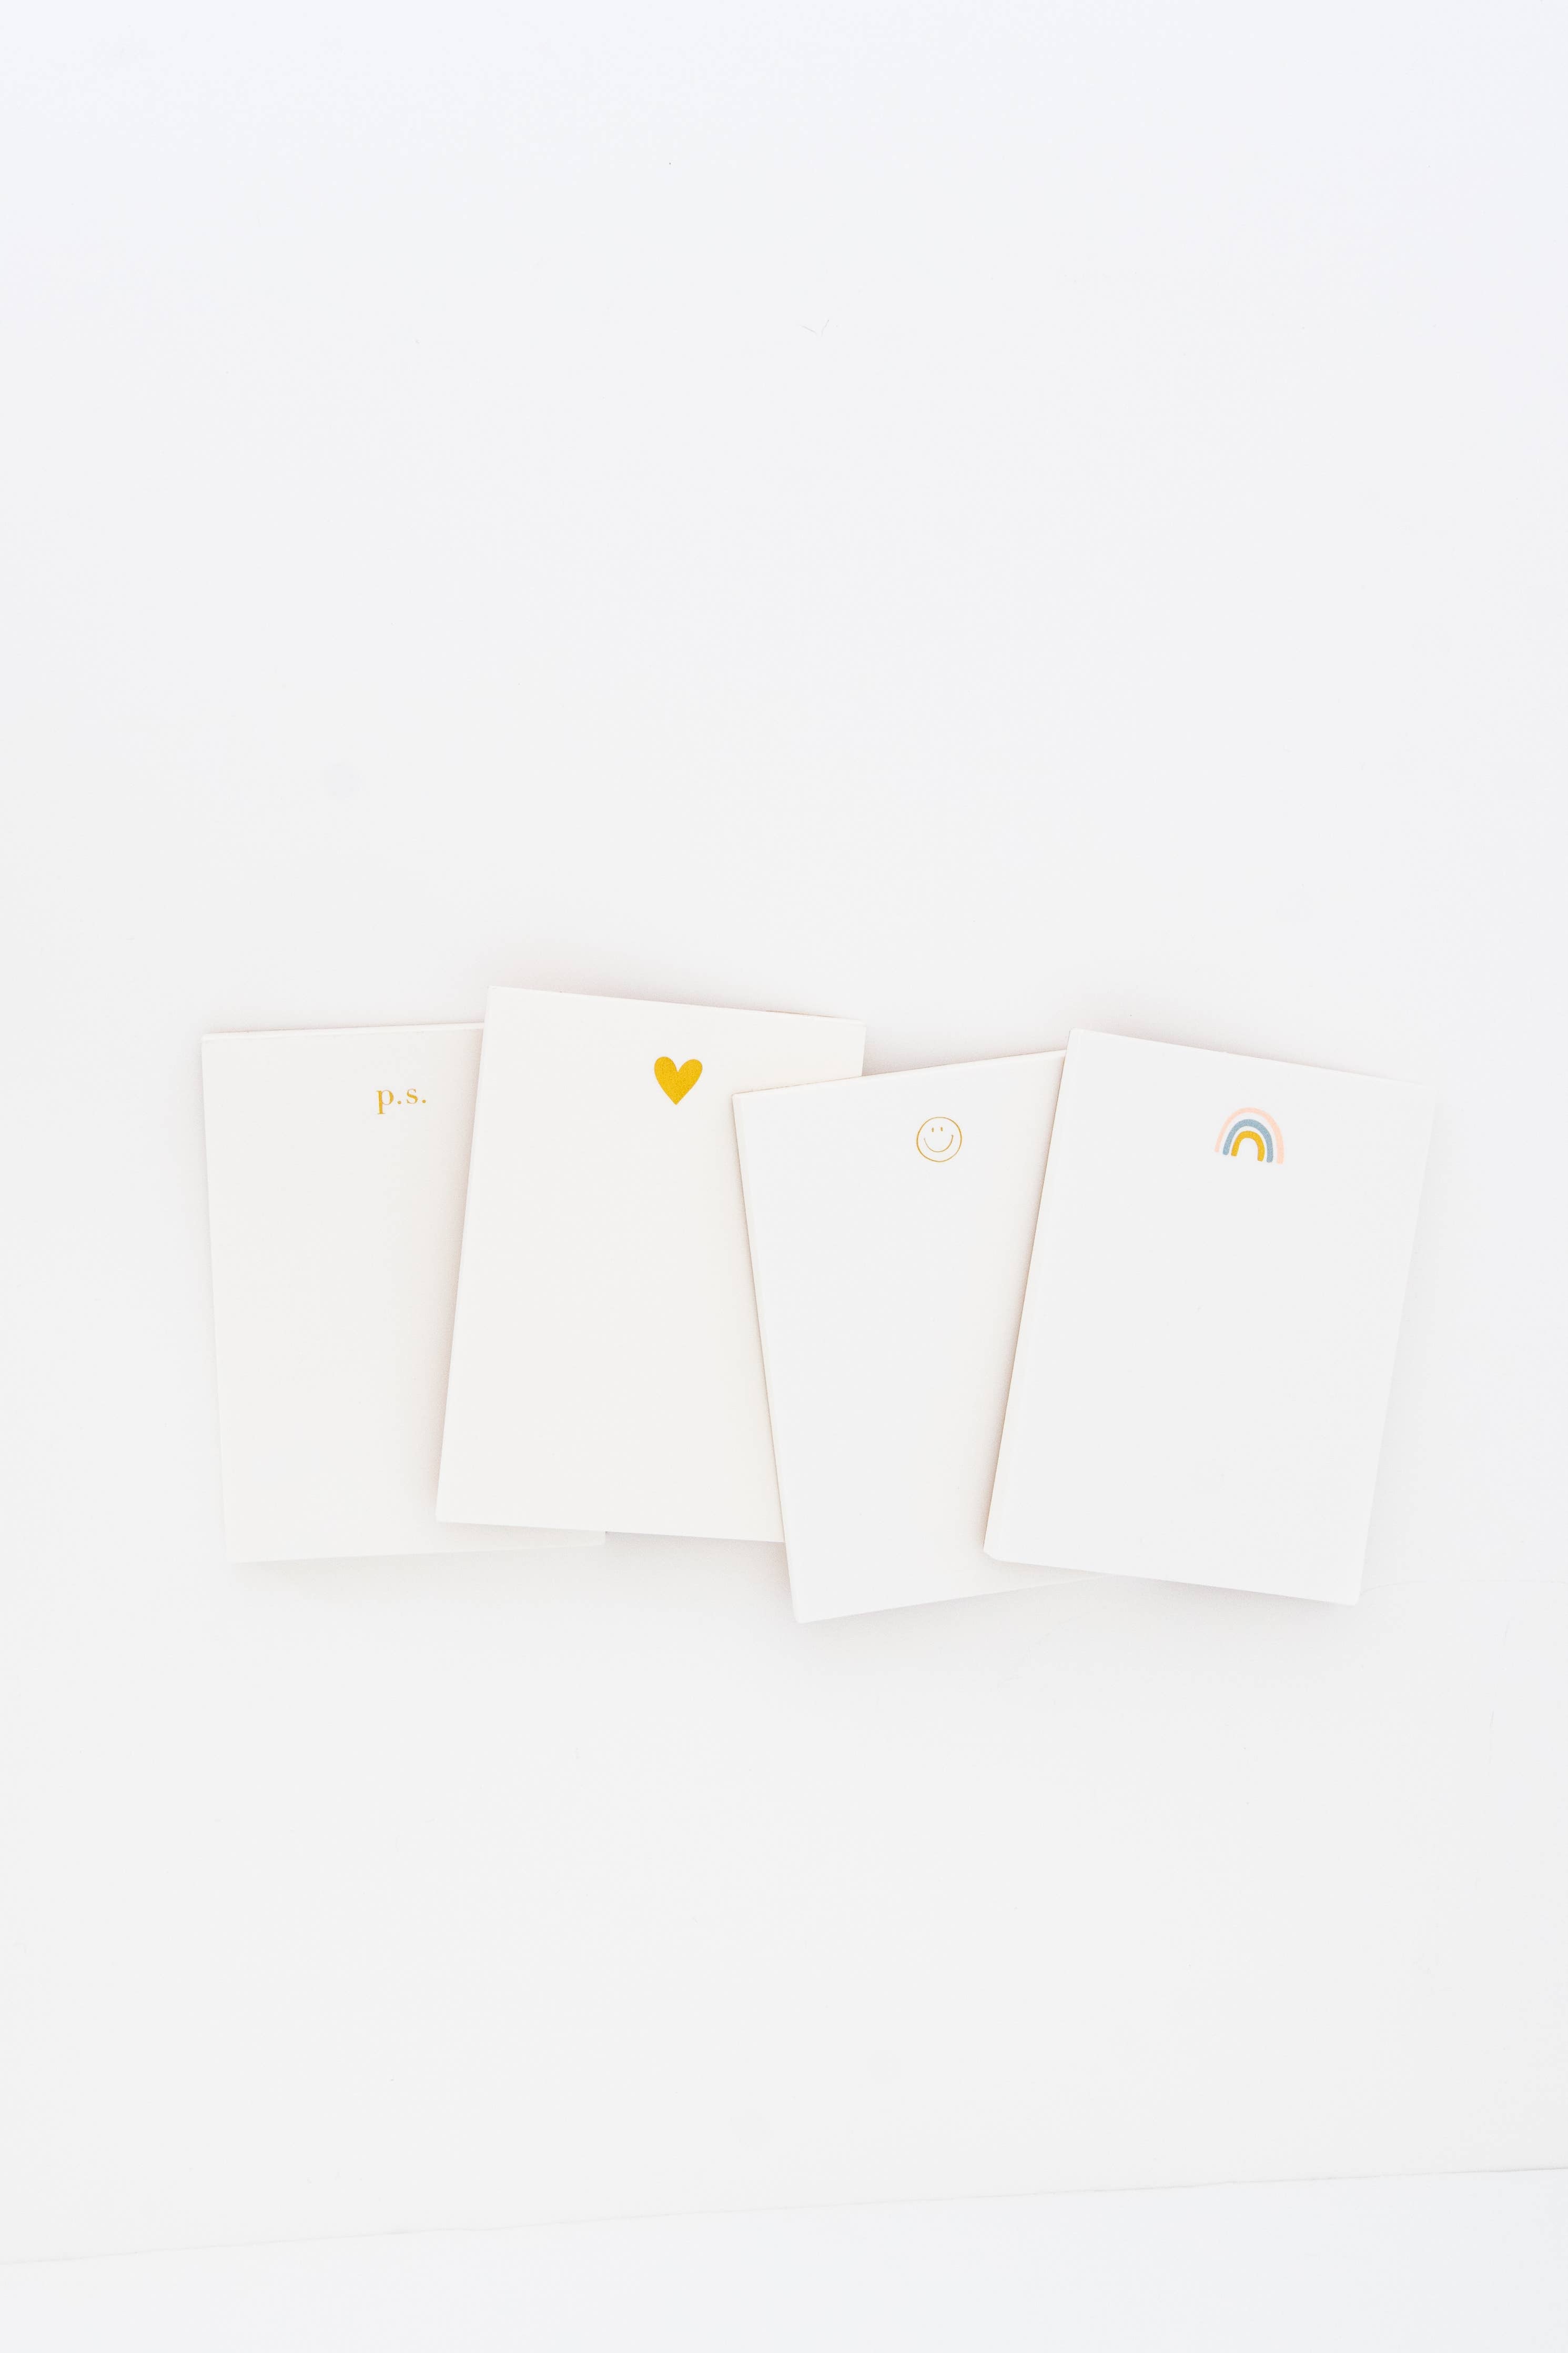 Stack of miniature notebooks with p.s, gold heart, smiley face and rainbow design on top notebook.